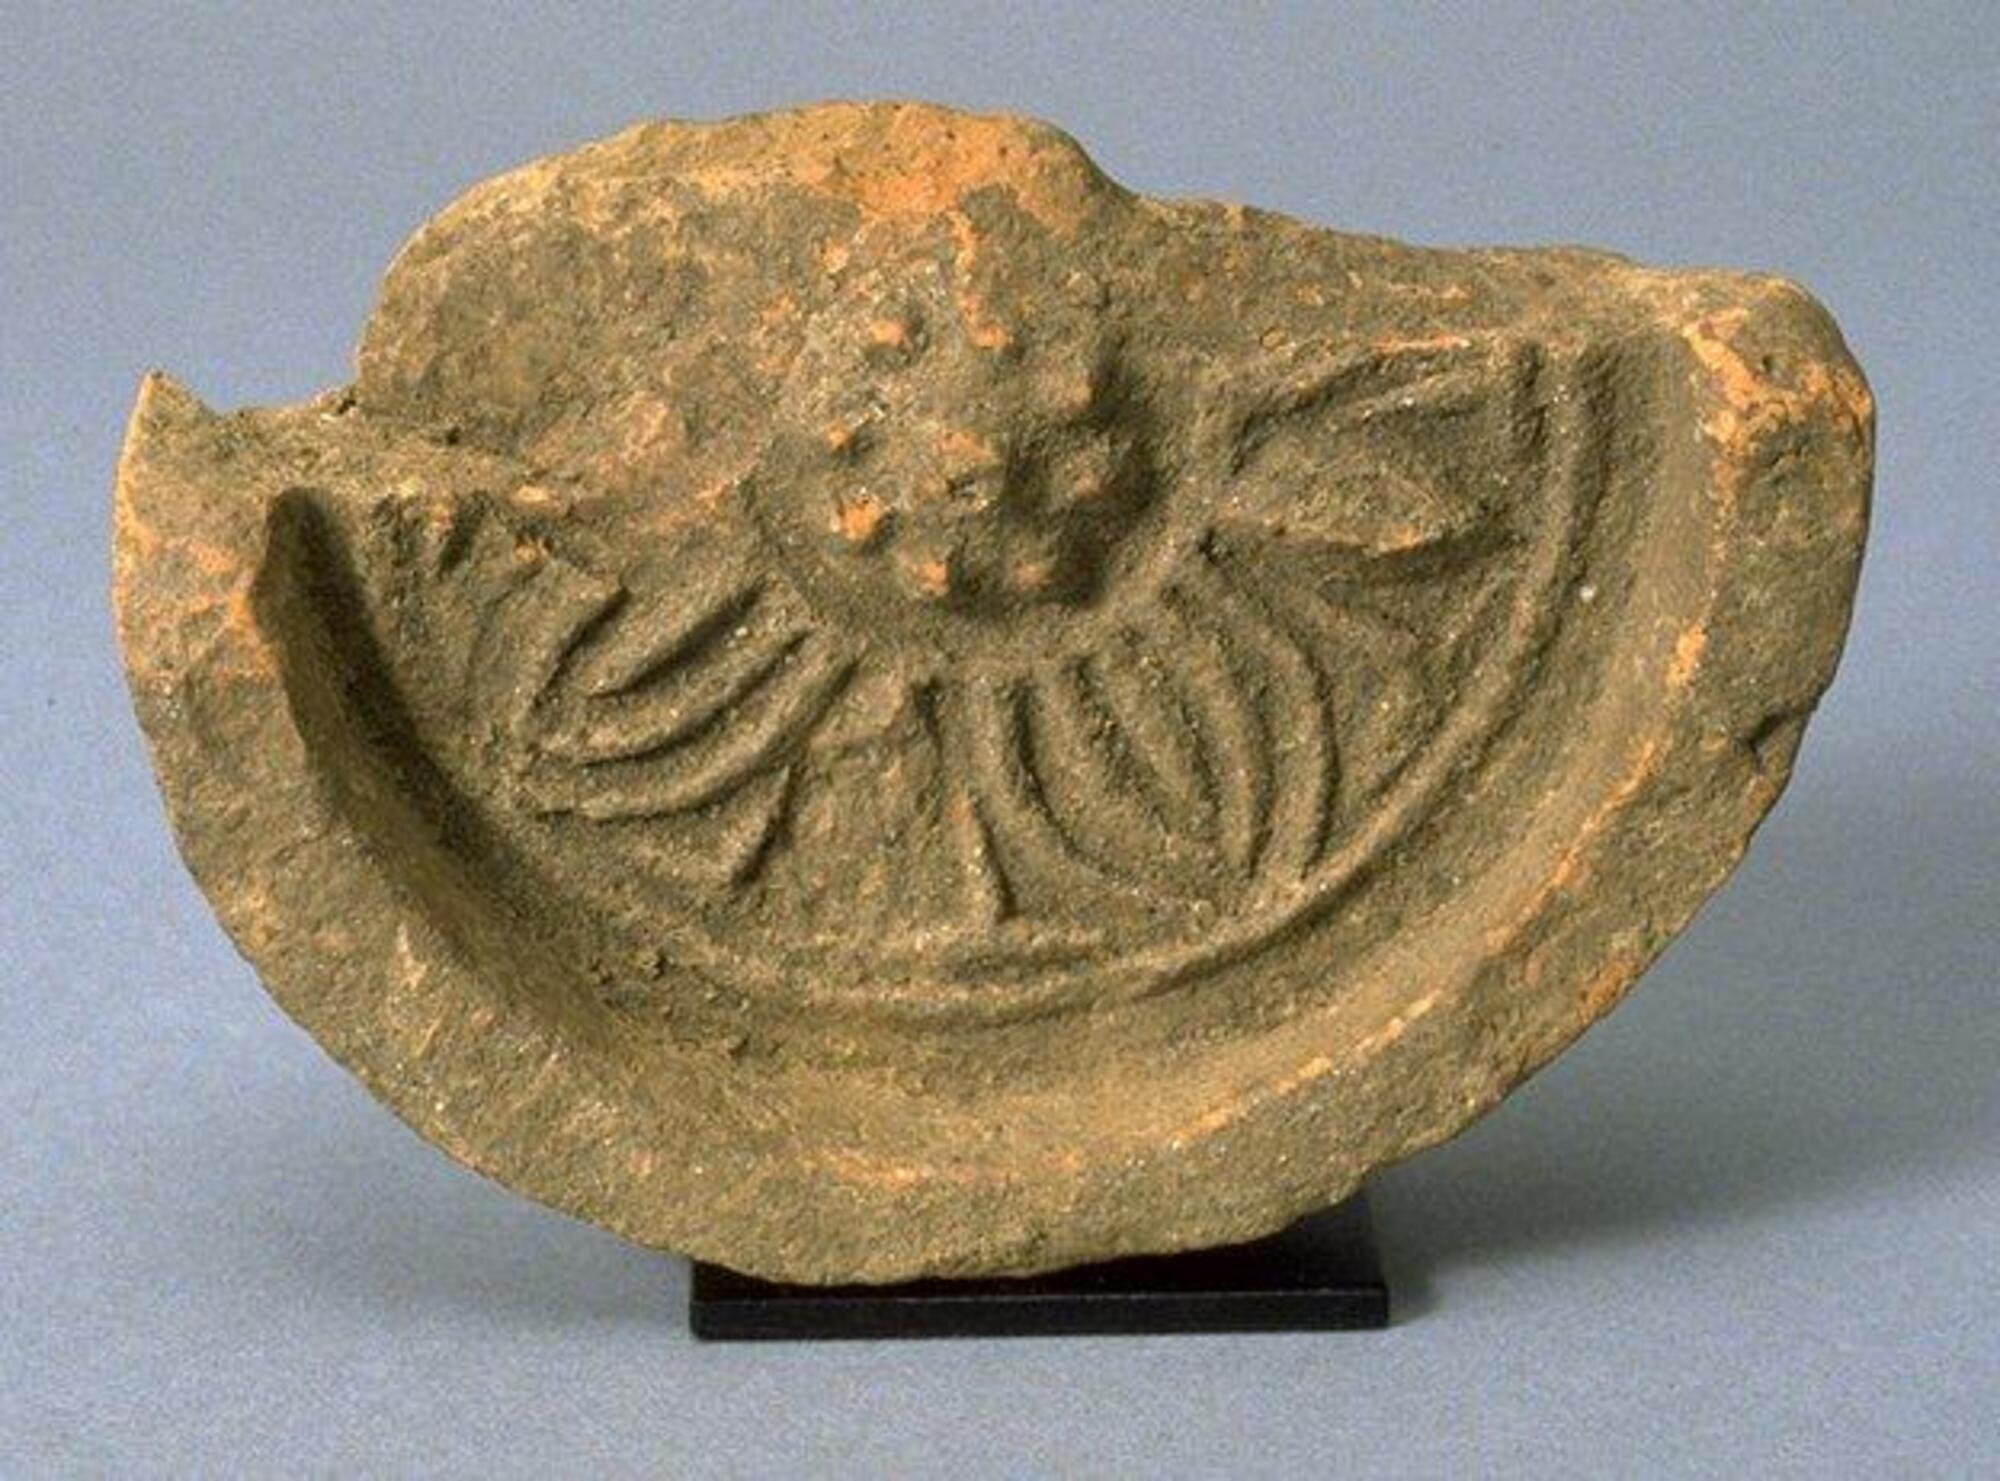 A fragment of unglazed earthenware: approximately half of a round, molded roof tile, depicting a central lotus flower in relief. 